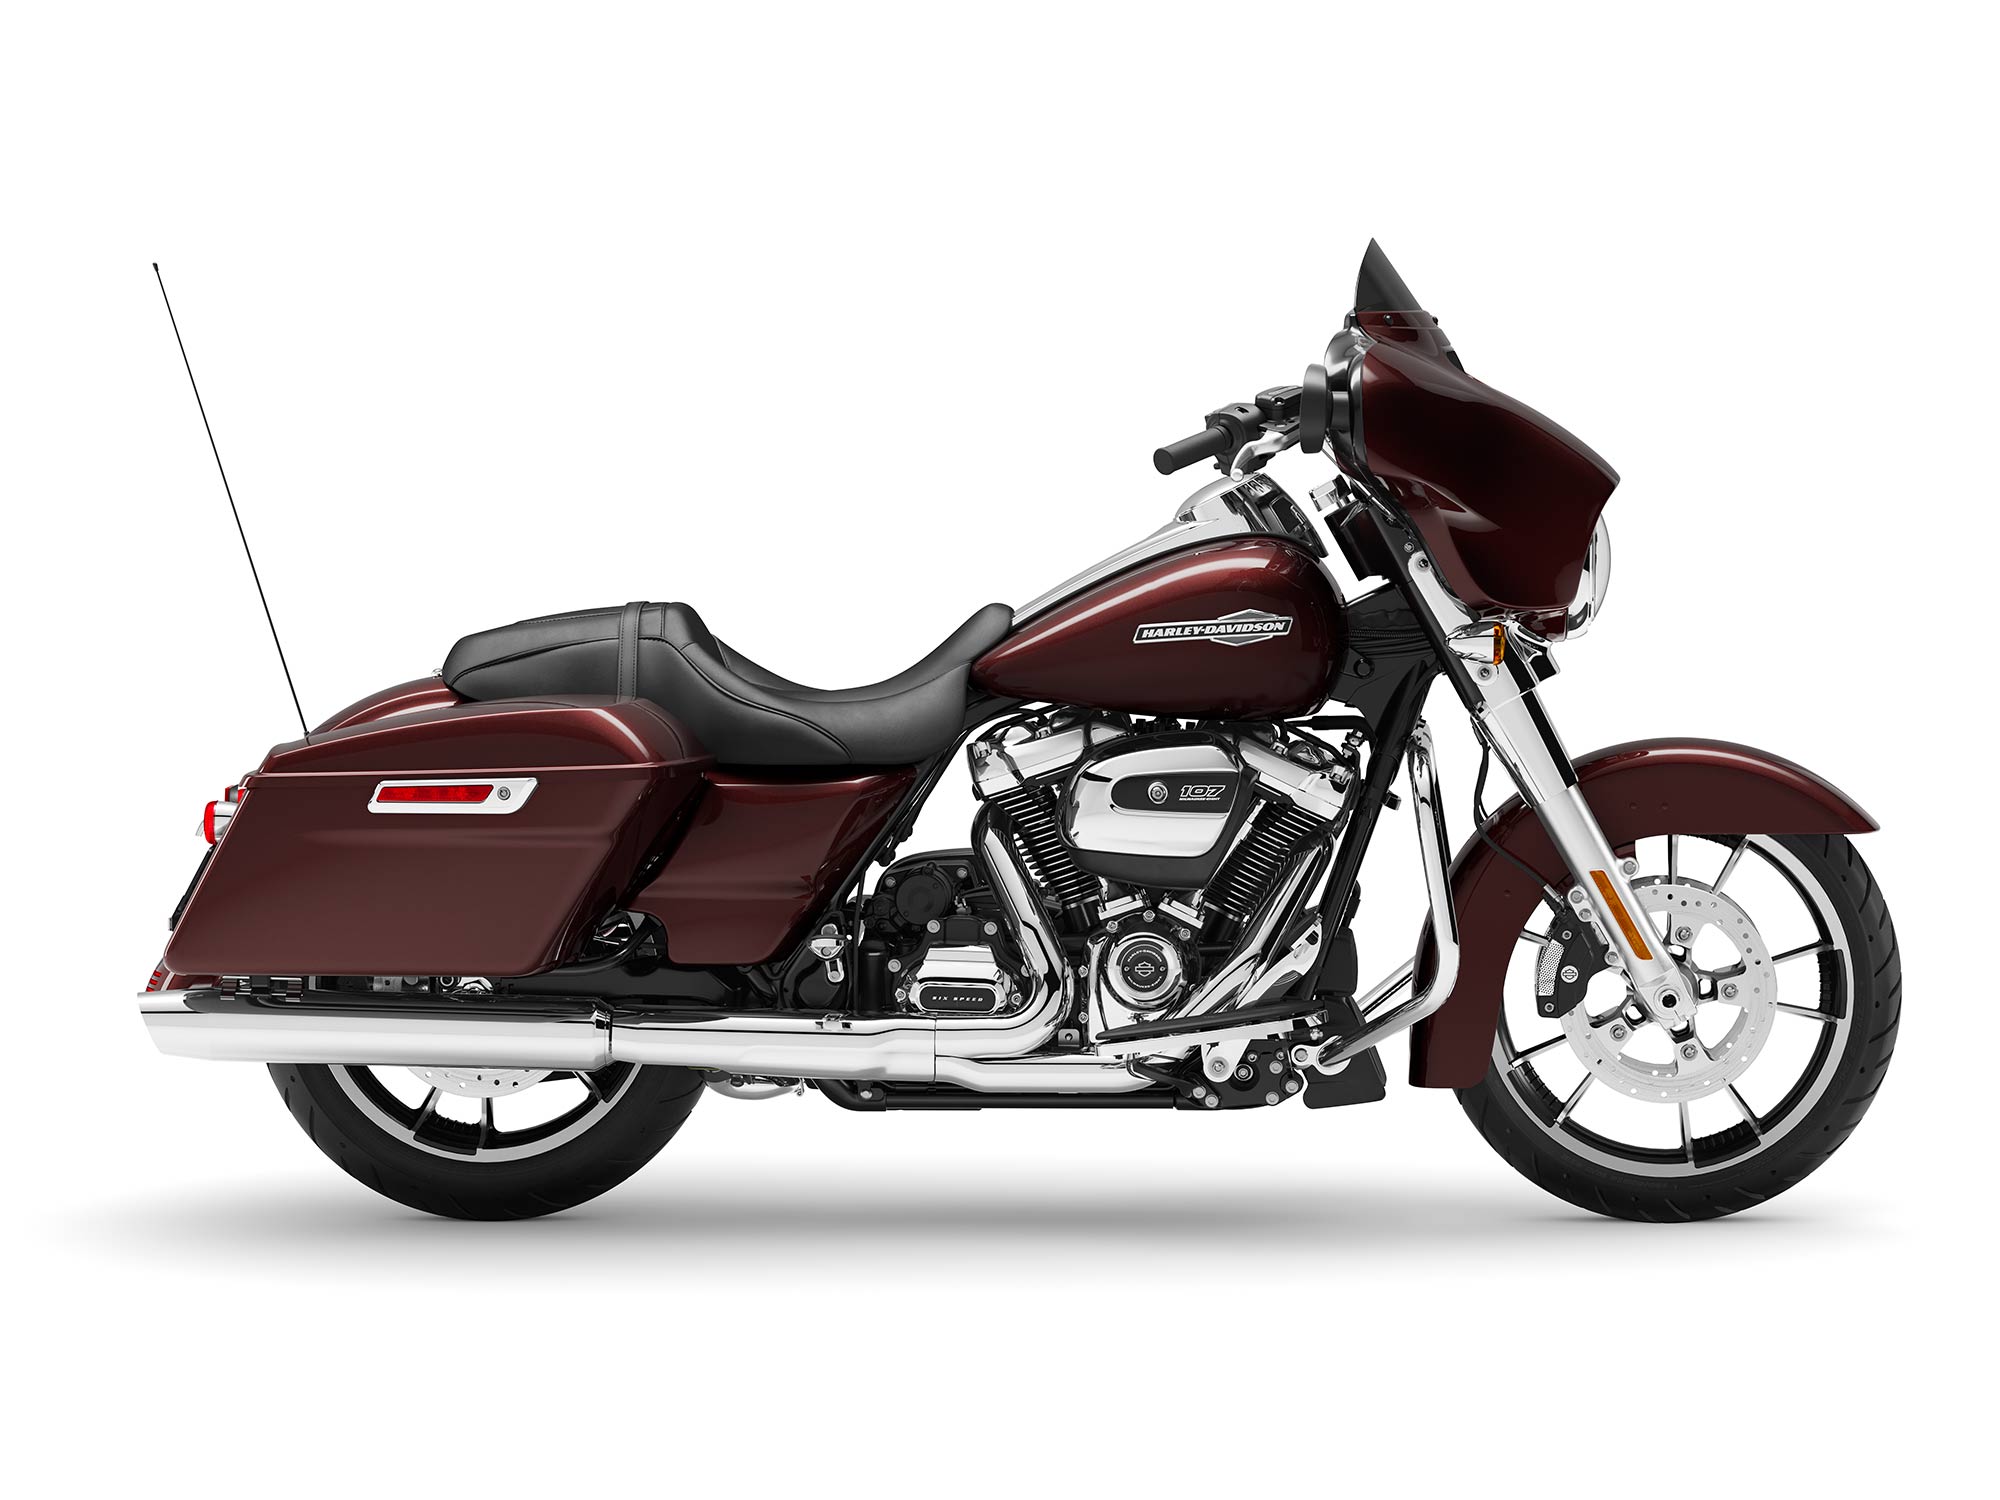 2021 Harley-Davidson Street Glide Special First Look (5 Fast Facts)